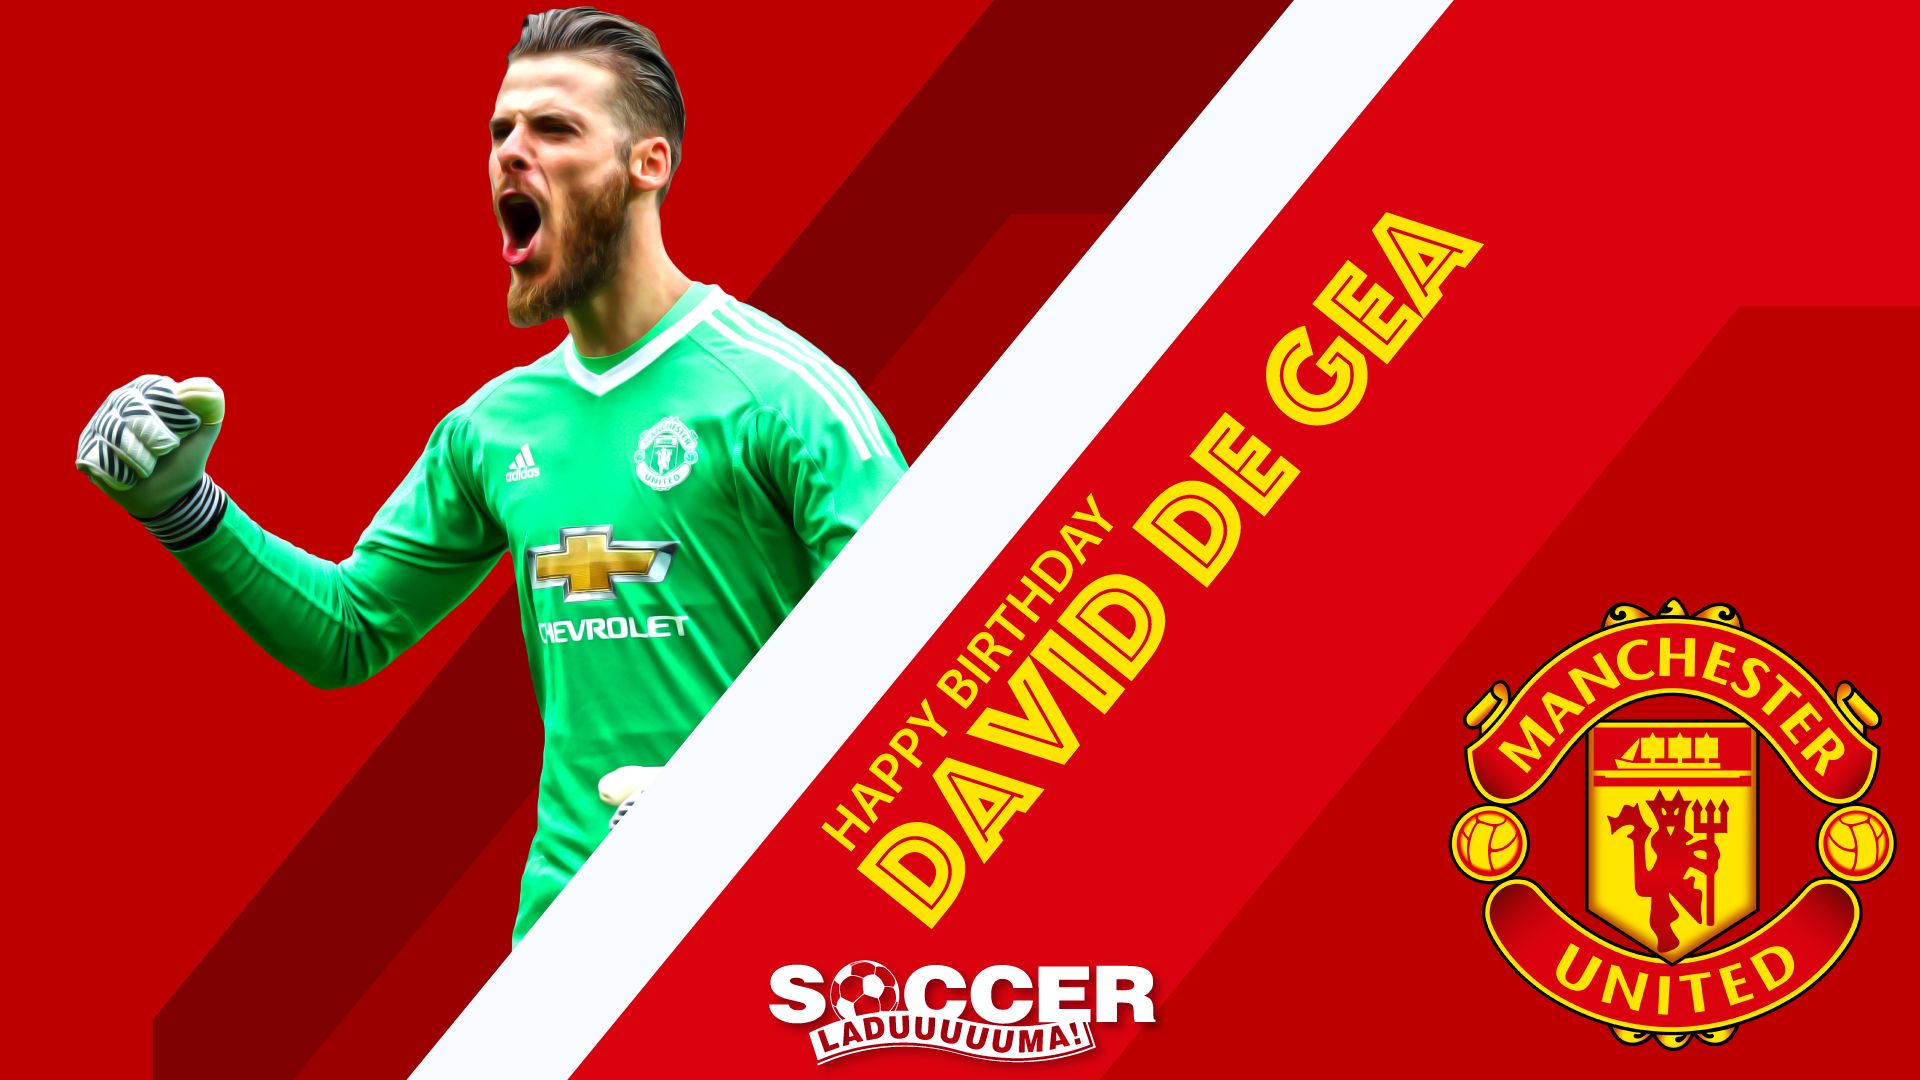 Happy Birthday to Manchester United s number one stopper, David De Gea. The Spanish goalkeeper is 27 today 